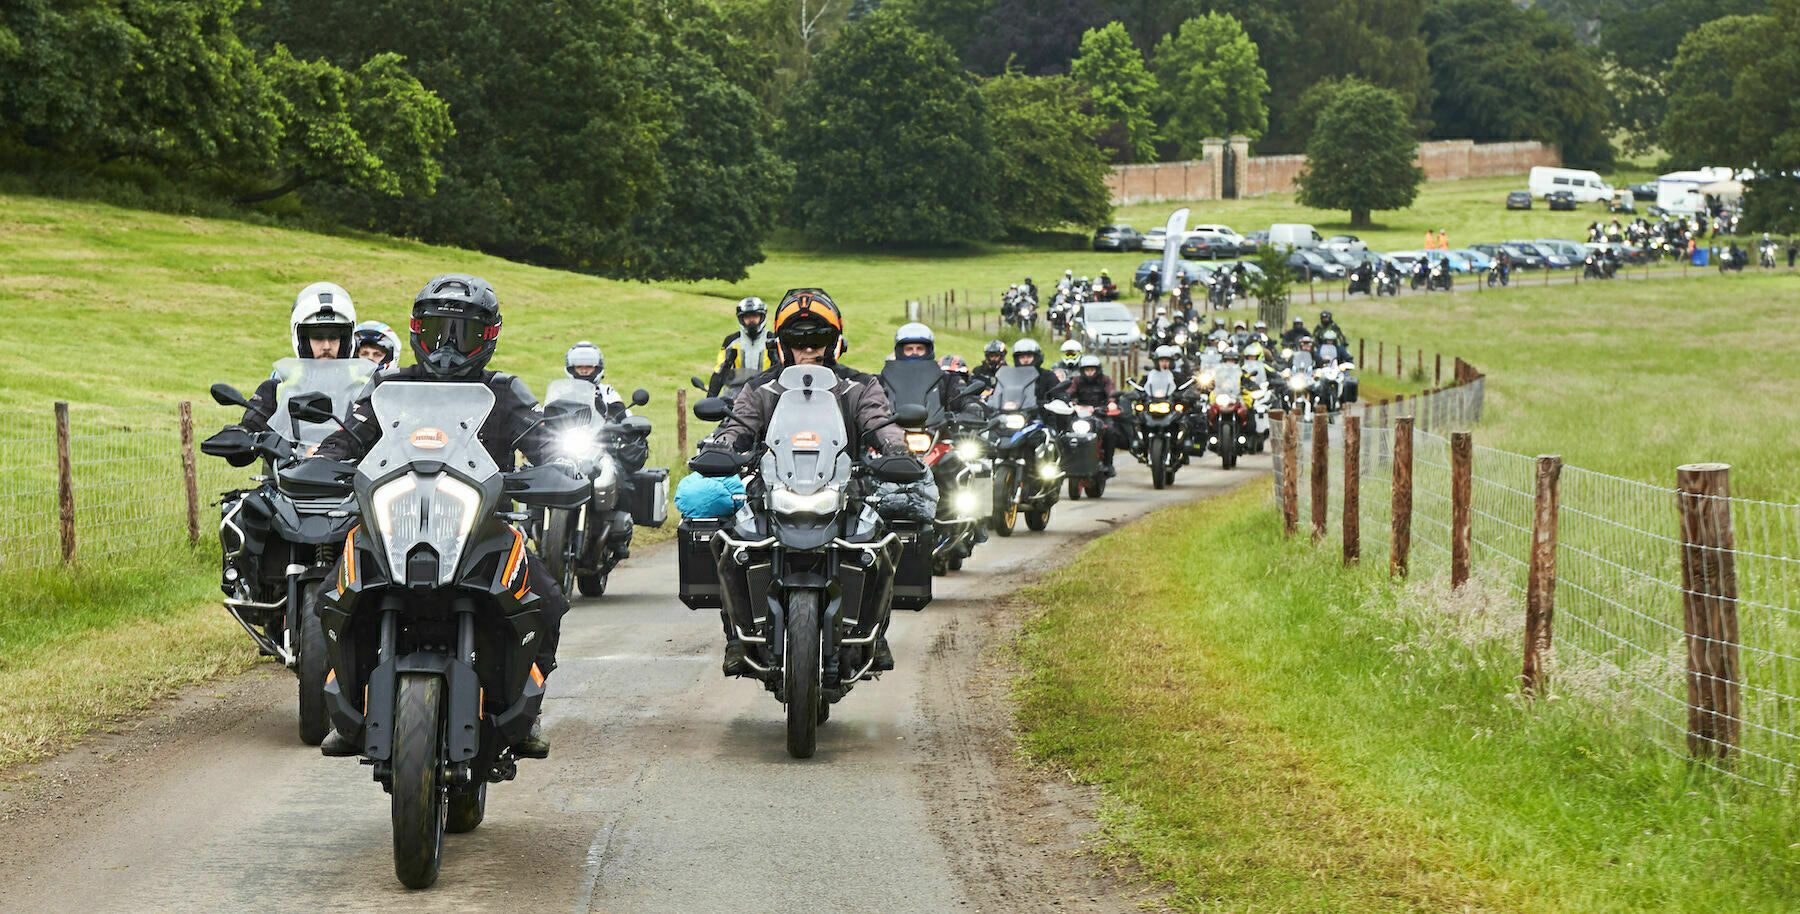 A group of motorcyclists ride in the Ragley Hall Estate